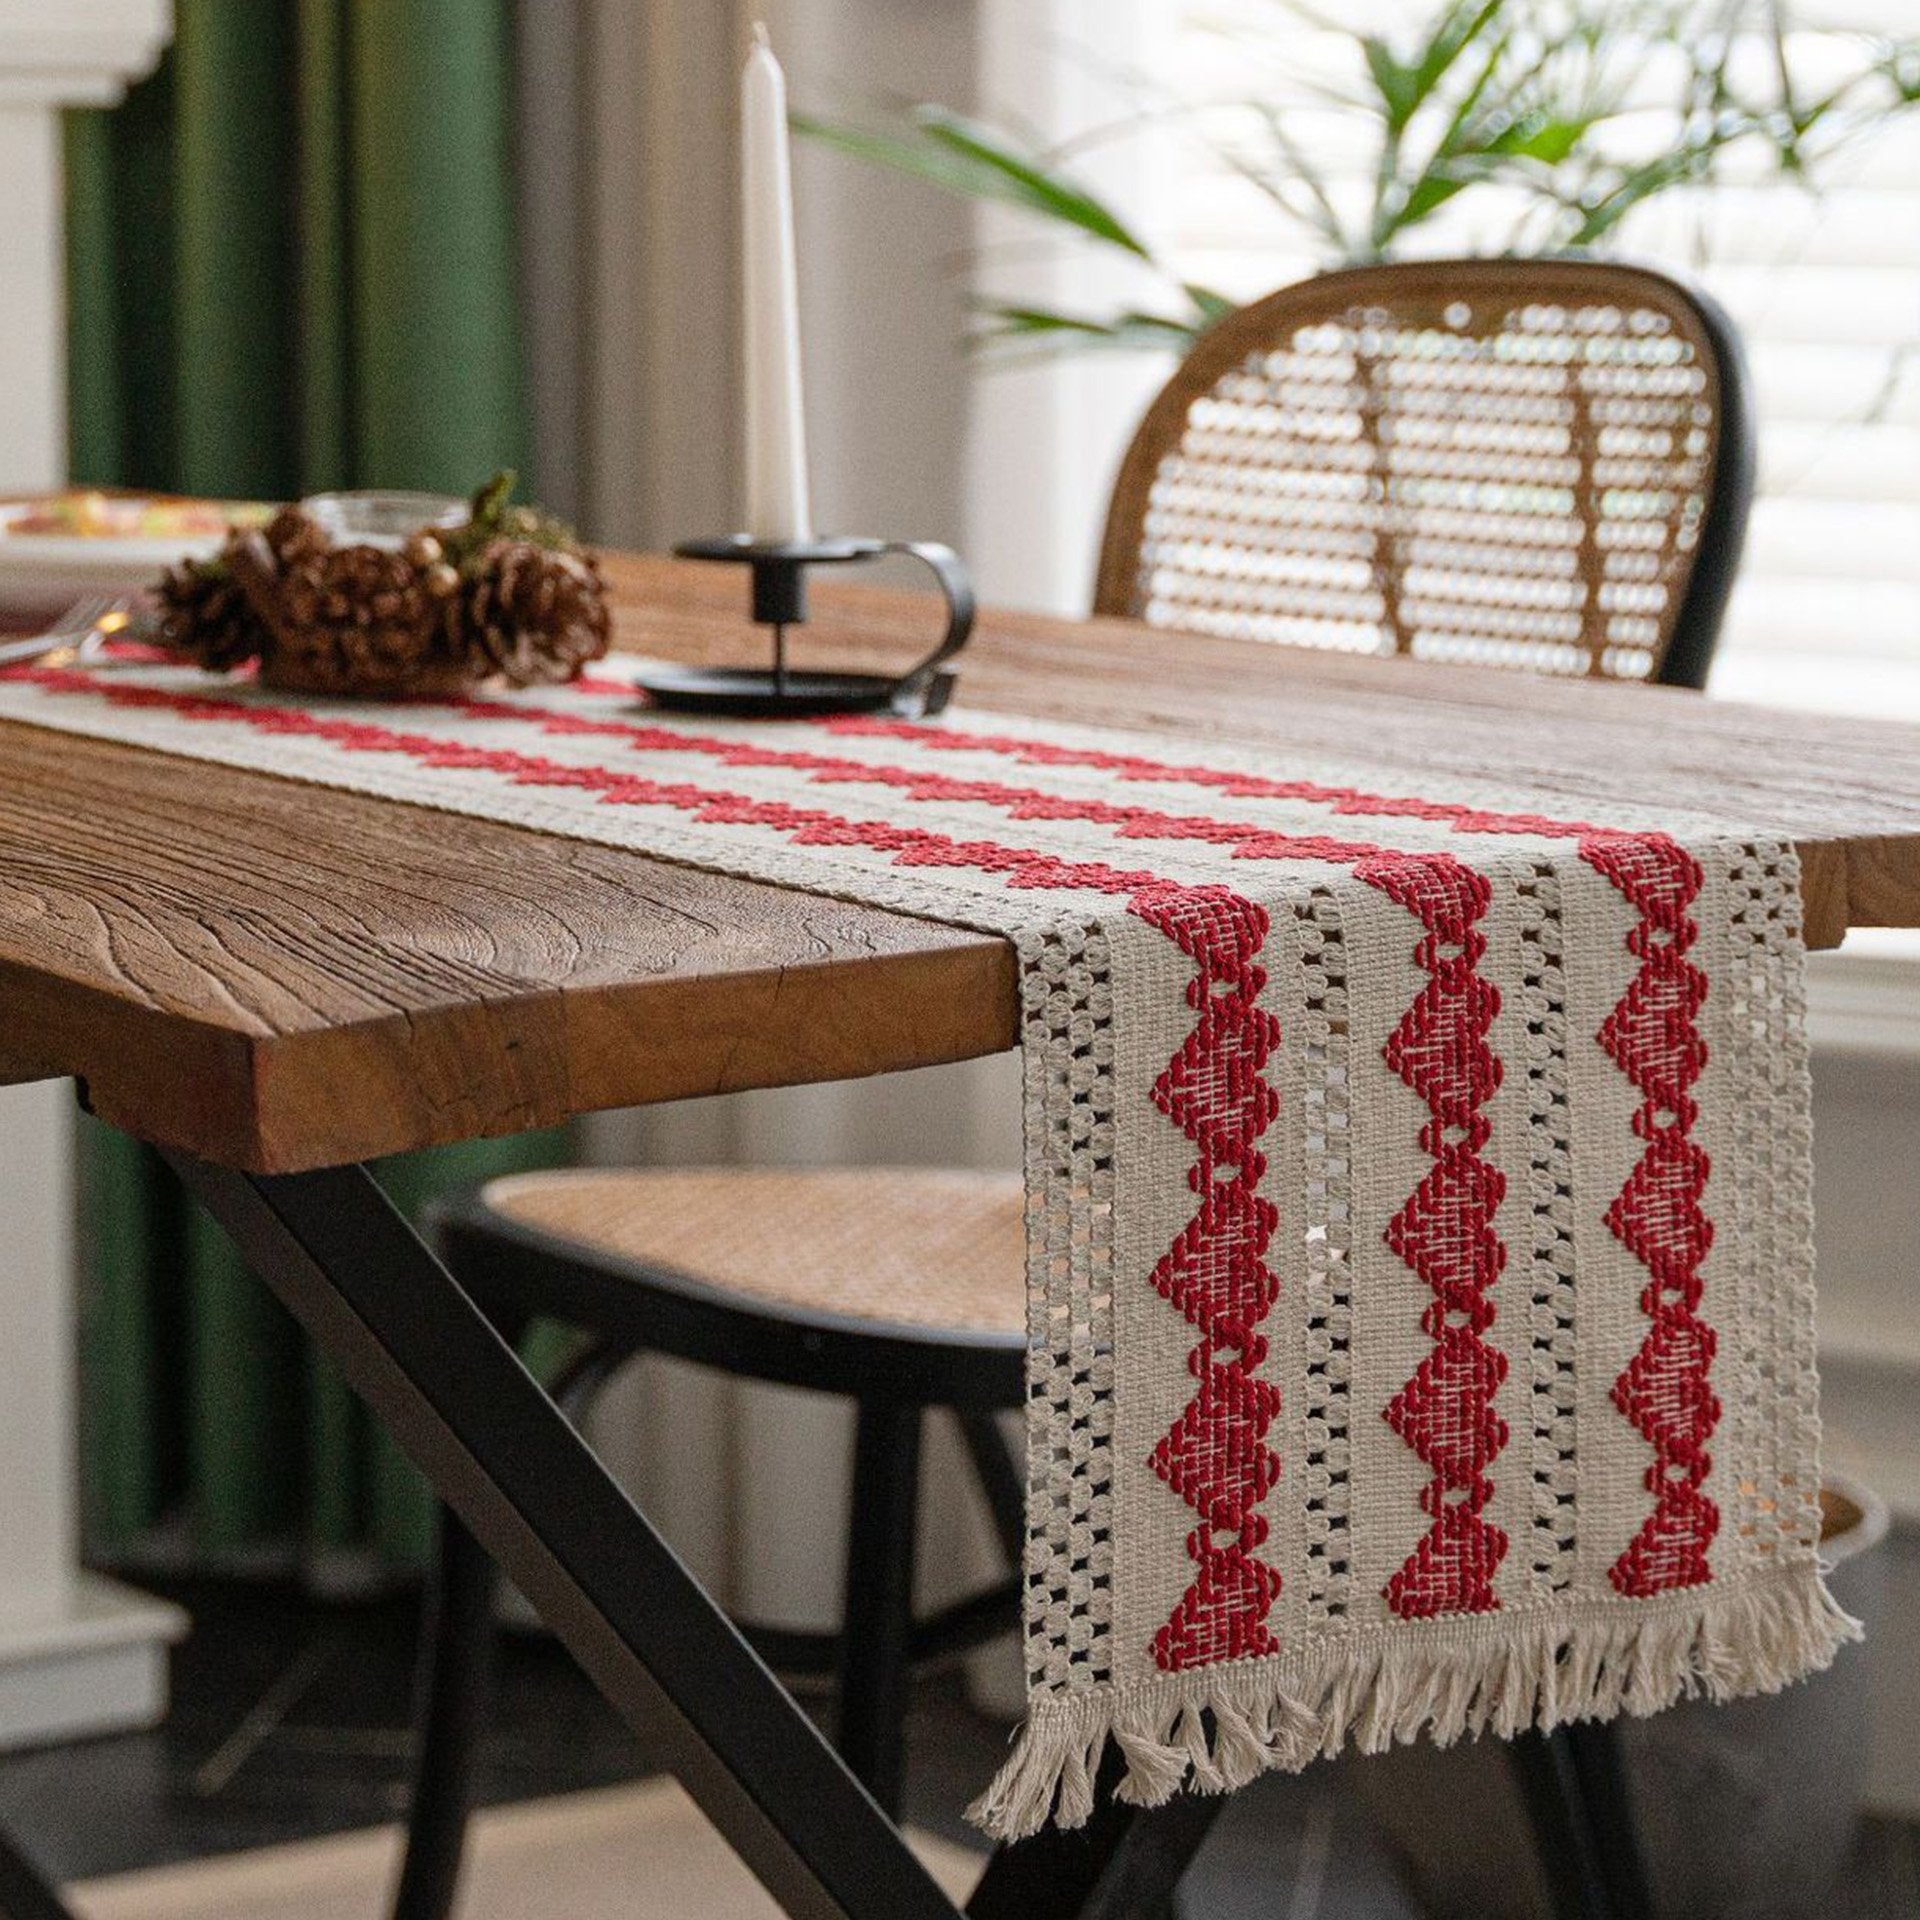 30X160 : 11.81″ * 62.99″, MULTI PATTERNED TABLE CLOTH TABLE RUNNER